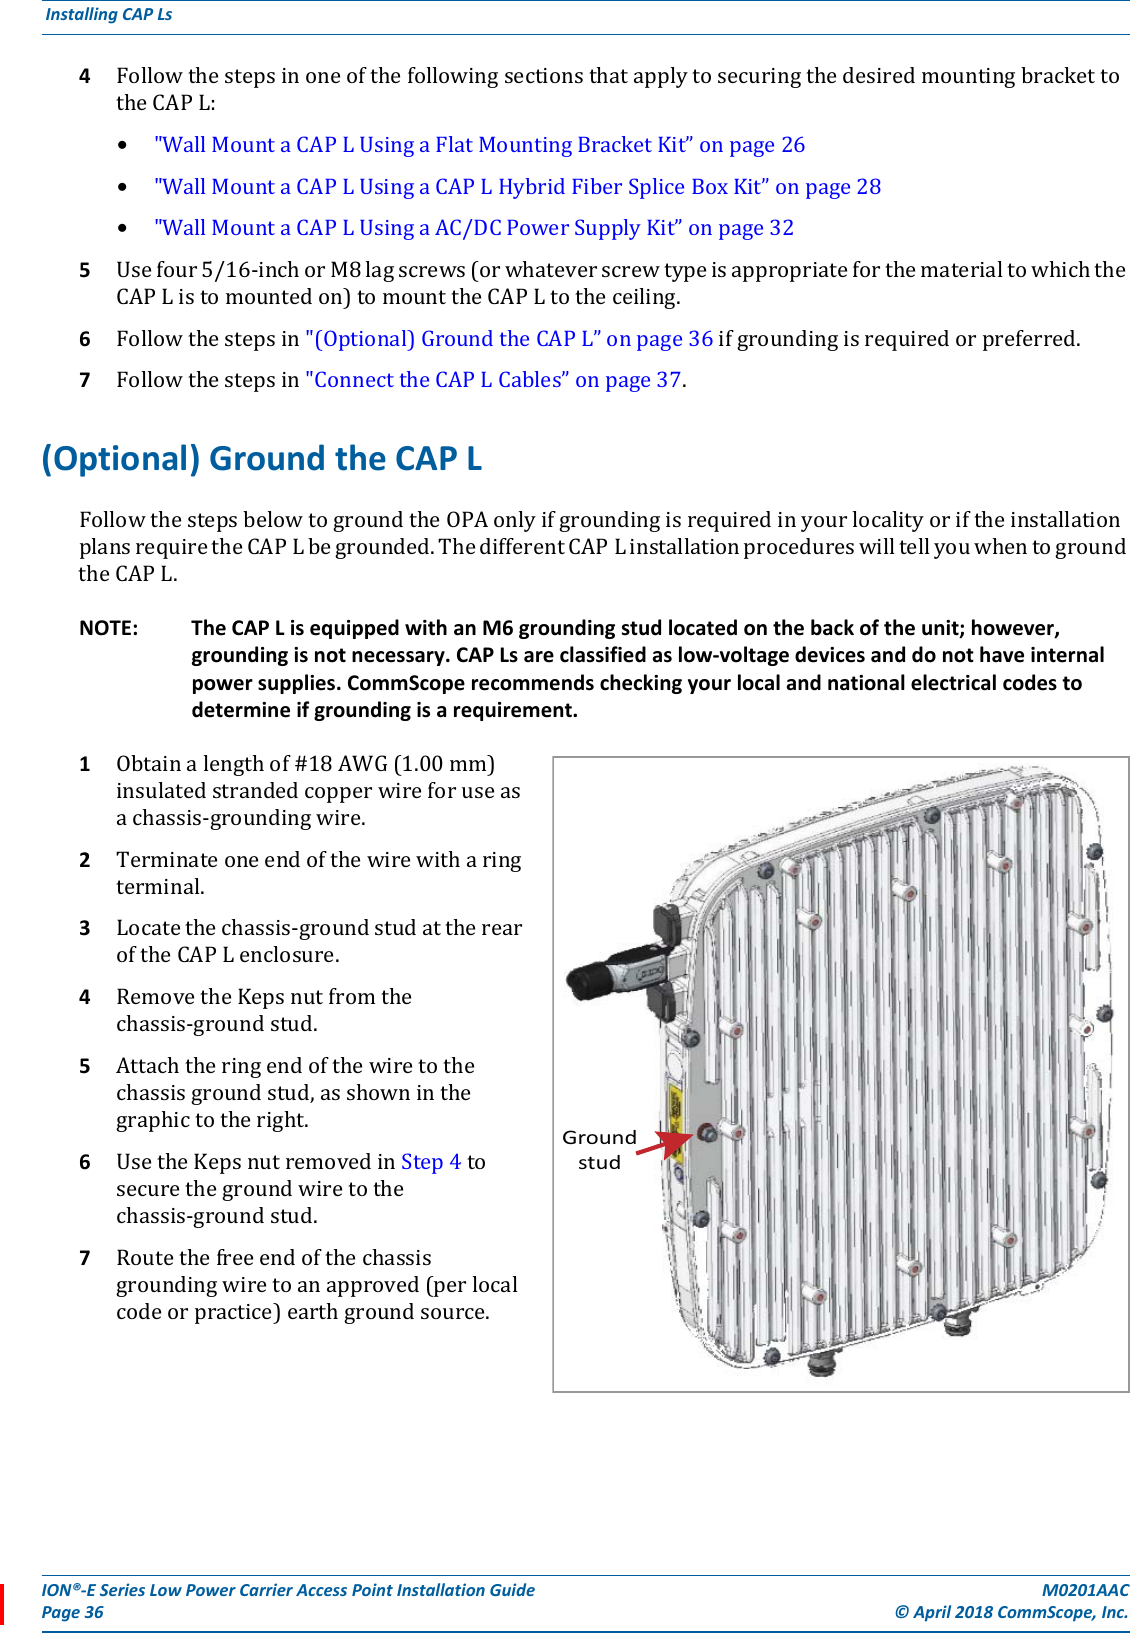 ION®-E Series Low Power Carrier Access Point Installation Guide M0201AACPage 36 © April 2018 CommScope, Inc. Installing CAP Ls  4FollowthestepsinoneofthefollowingsectionsthatapplytosecuringthedesiredmountingbrackettotheCAPL:•&quot;WallMountaCAPLUsingaFlatMountingBracketKit”onpage26•&quot;WallMountaCAPLUsingaCAPLHybridFiberSpliceBoxKit”onpage28•&quot;WallMountaCAPLUsingaAC/DCPowerSupplyKit”onpage325Usefour5/16-inchorM8lagscrews(orwhateverscrewtypeisappropriateforthematerialtowhichtheCAPListomountedon)tomounttheCAPLtotheceiling.6Followthestepsin&quot;(Optional)GroundtheCAPL”onpage36ifgroundingisrequiredorpreferred.7Followthestepsin&quot;ConnecttheCAPLCables”onpage37.(Optional) Ground the CAP LFollowthestepsbelowtogroundtheOPAonlyifgroundingisrequiredinyourlocalityoriftheinstallationplansrequiretheCAPLbegrounded.ThedifferentCAPLinstallationprocedureswilltellyouwhentogroundtheCAPL.NOTE: The CAP L is equipped with an M6 grounding stud located on the back of the unit; however, grounding is not necessary. CAP Ls are classified as low-voltage devices and do not have internal power supplies. CommScope recommends checking your local and national electrical codes to determine if grounding is a requirement. 1Obtainalengthof#18AWG(1.00mm)insulatedstrandedcopperwireforuseasachassis-groundingwire.2Terminateoneendofthewirewitharingterminal.3Locatethechassis-groundstudattherearoftheCAPLenclosure.4RemovetheKepsnutfromthechassis-groundstud.5Attachtheringendofthewiretothechassisgroundstud,asshowninthegraphictotheright.6UsetheKepsnutremovedinStep4tosecurethegroundwiretothechassis-groundstud.7Routethefreeendofthechassisgroundingwiretoanapproved(perlocalcodeorpractice)earthgroundsource.Groundstud